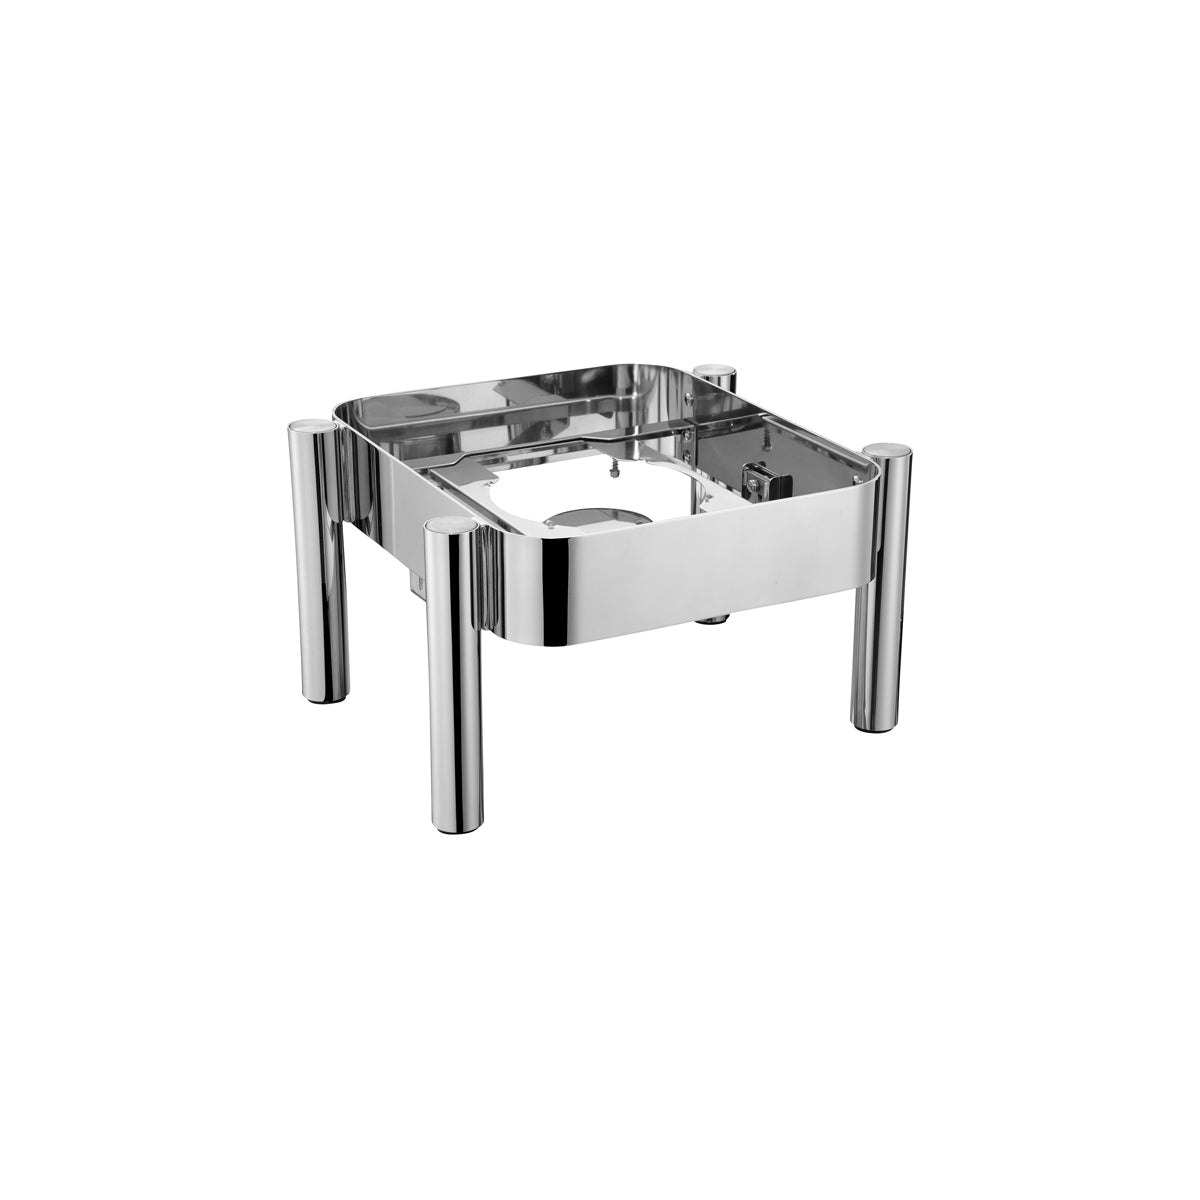 54903-S Chef Inox Chafer Rectangular Stand Stainless Steel 2/3 Size to Suit 54903 Tomkin Australia Hospitality Supplies